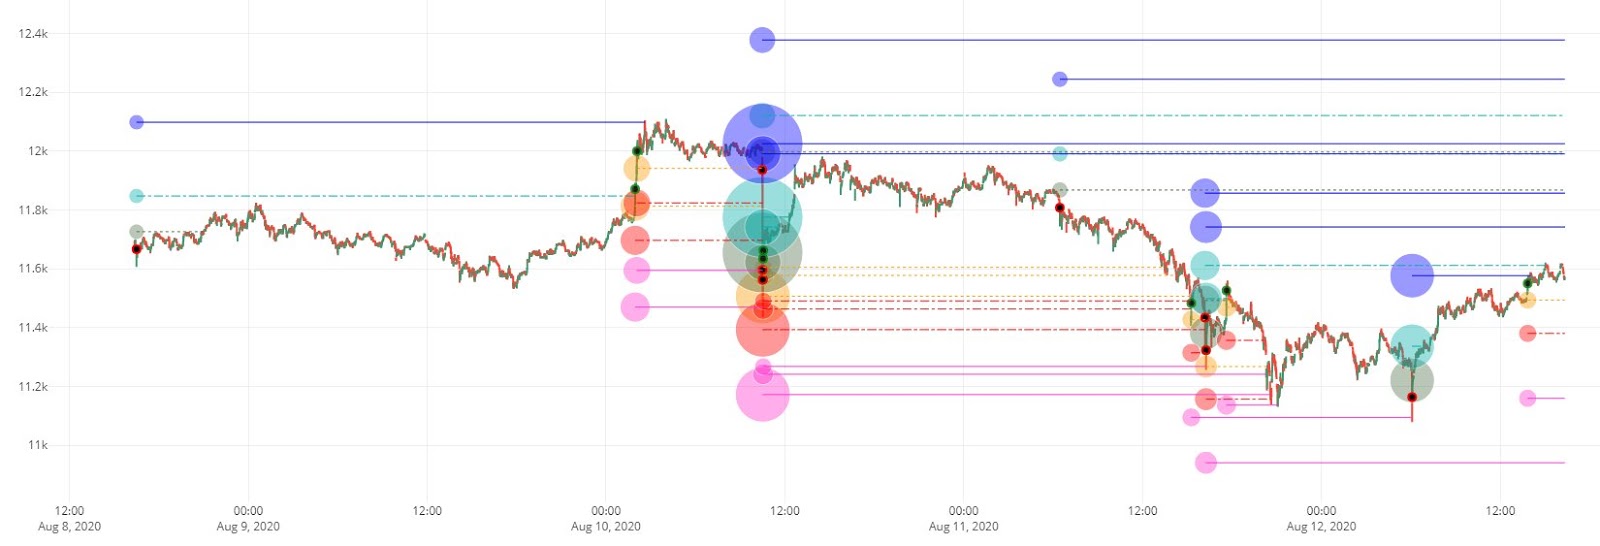 Bitcoin liquidation levels on the low time frame chart of Bitcoin